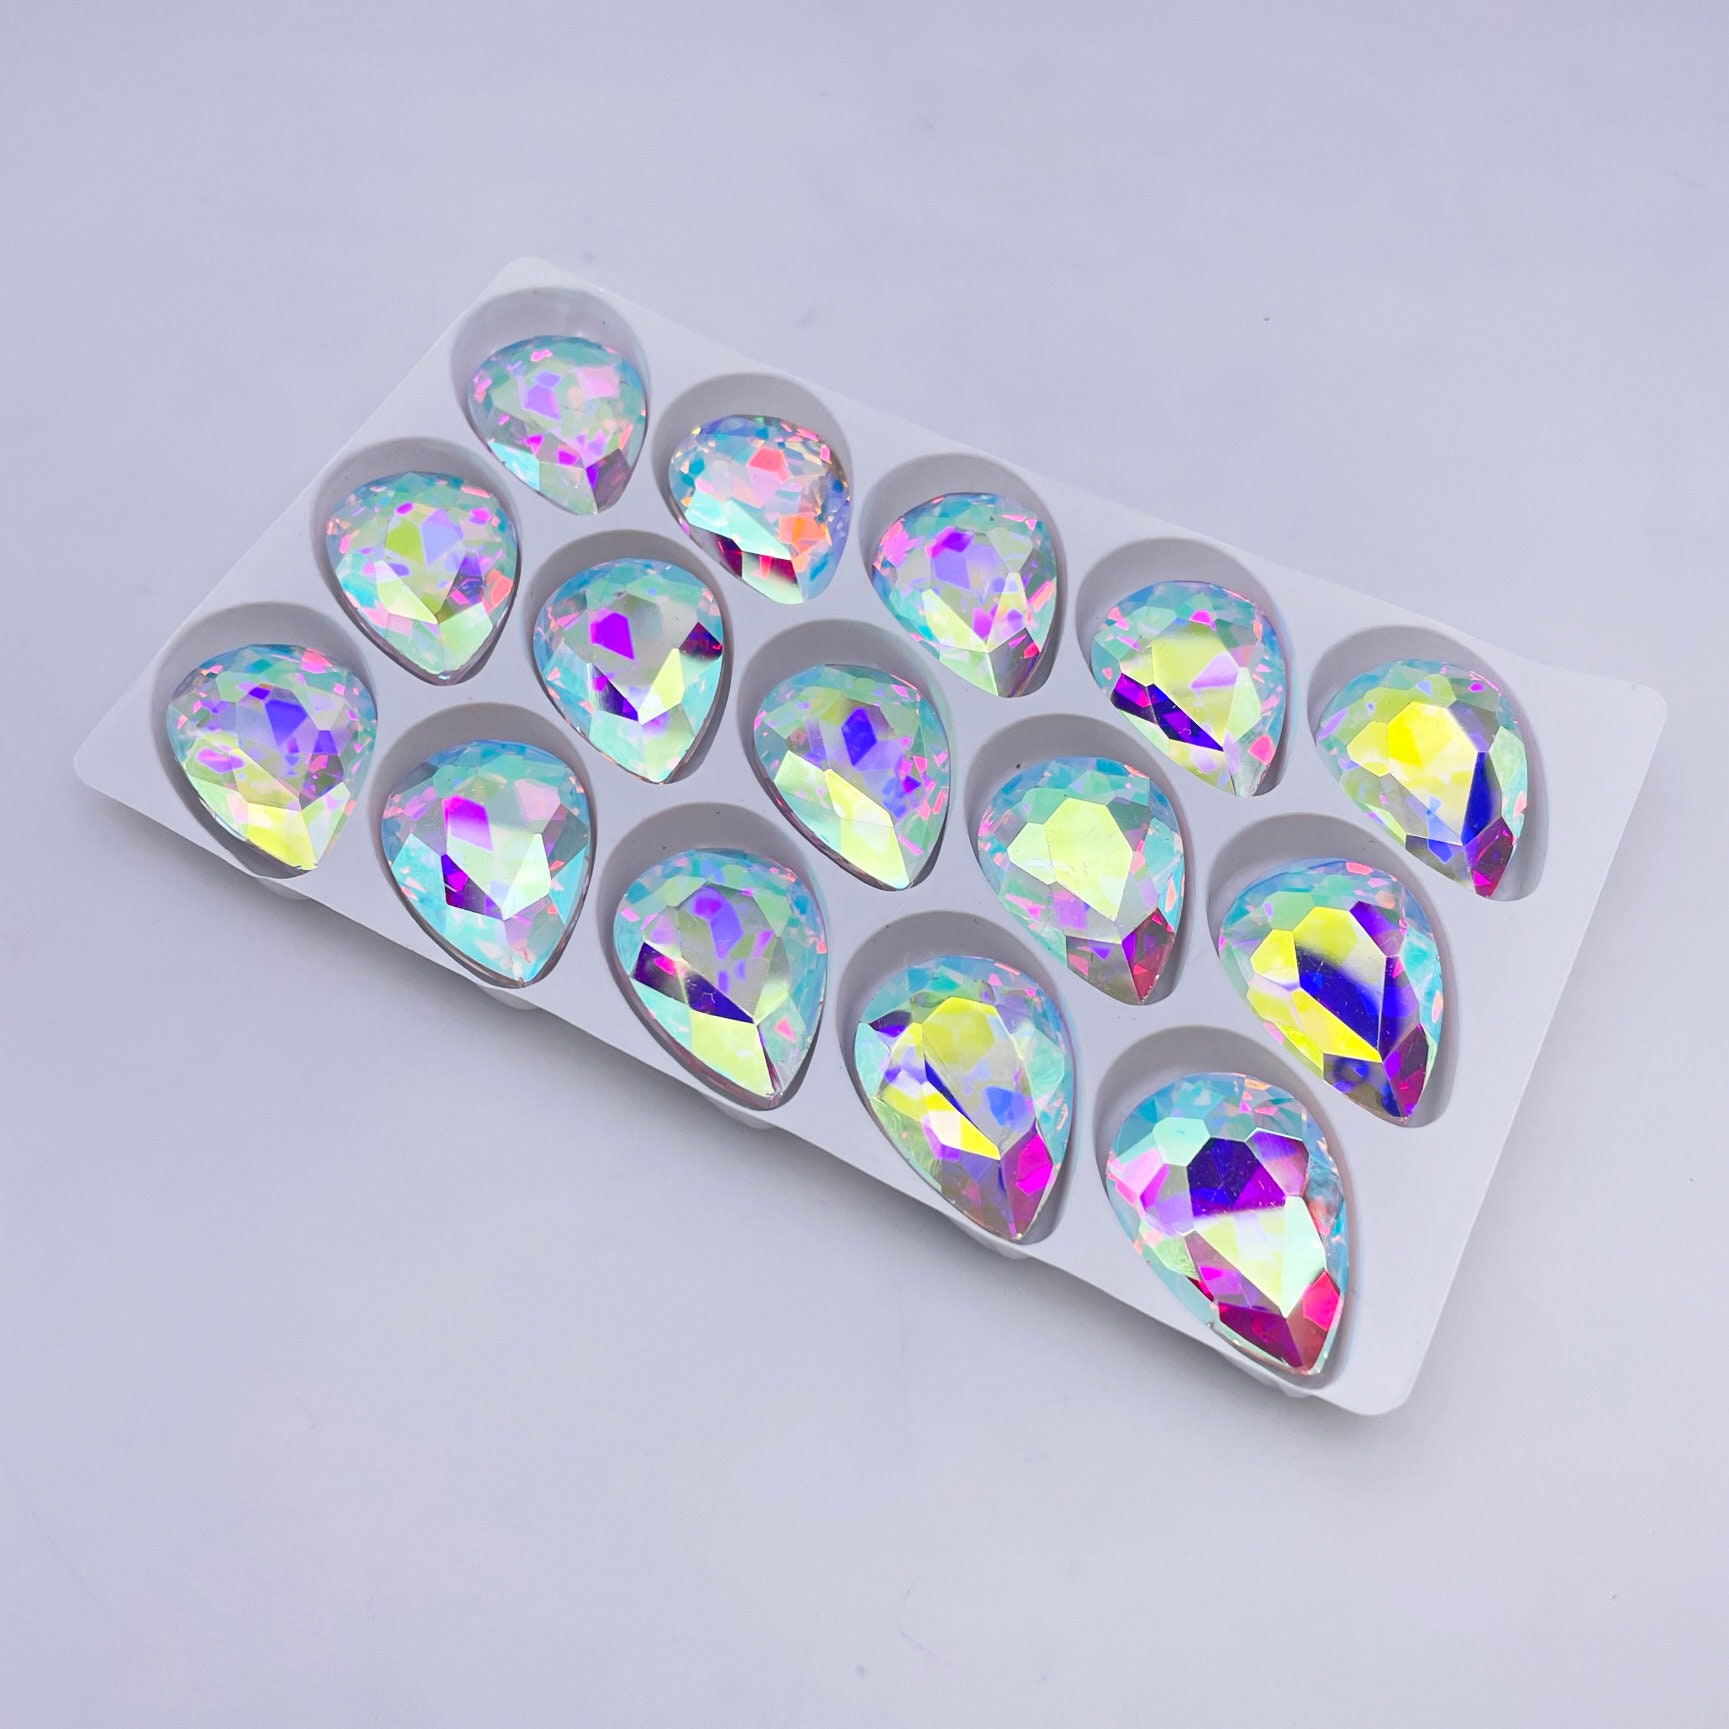 US$ 16.00 - 38 Color Teardrop Pointed Back Glass Crystal